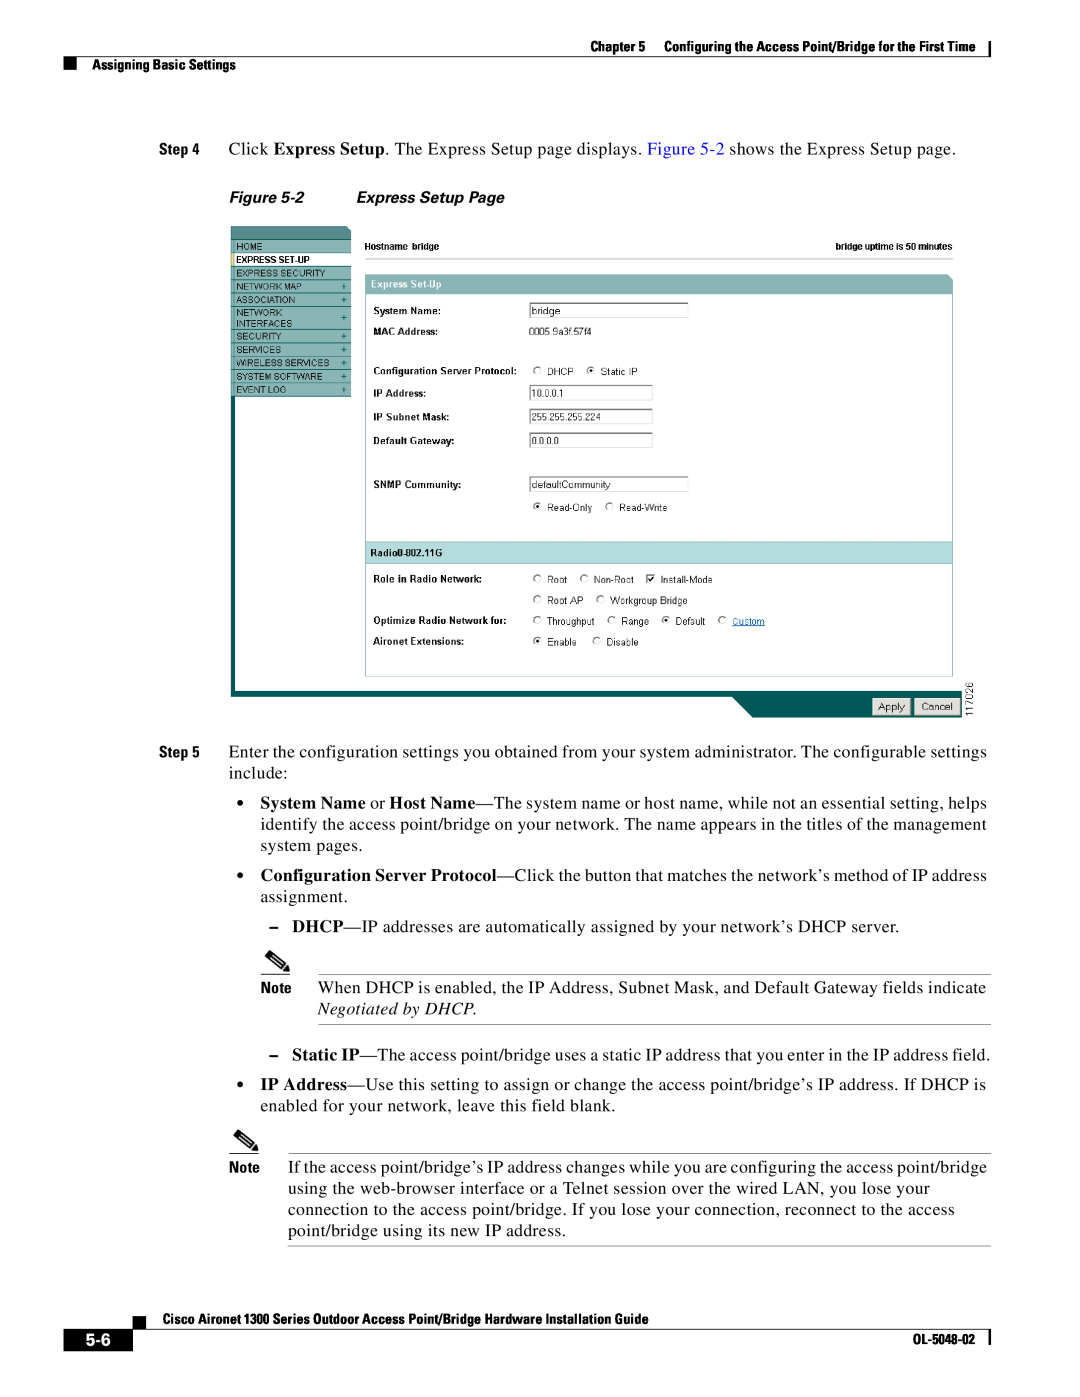 Cisco Systems 1300 Series manual 2 Express Setup Page 